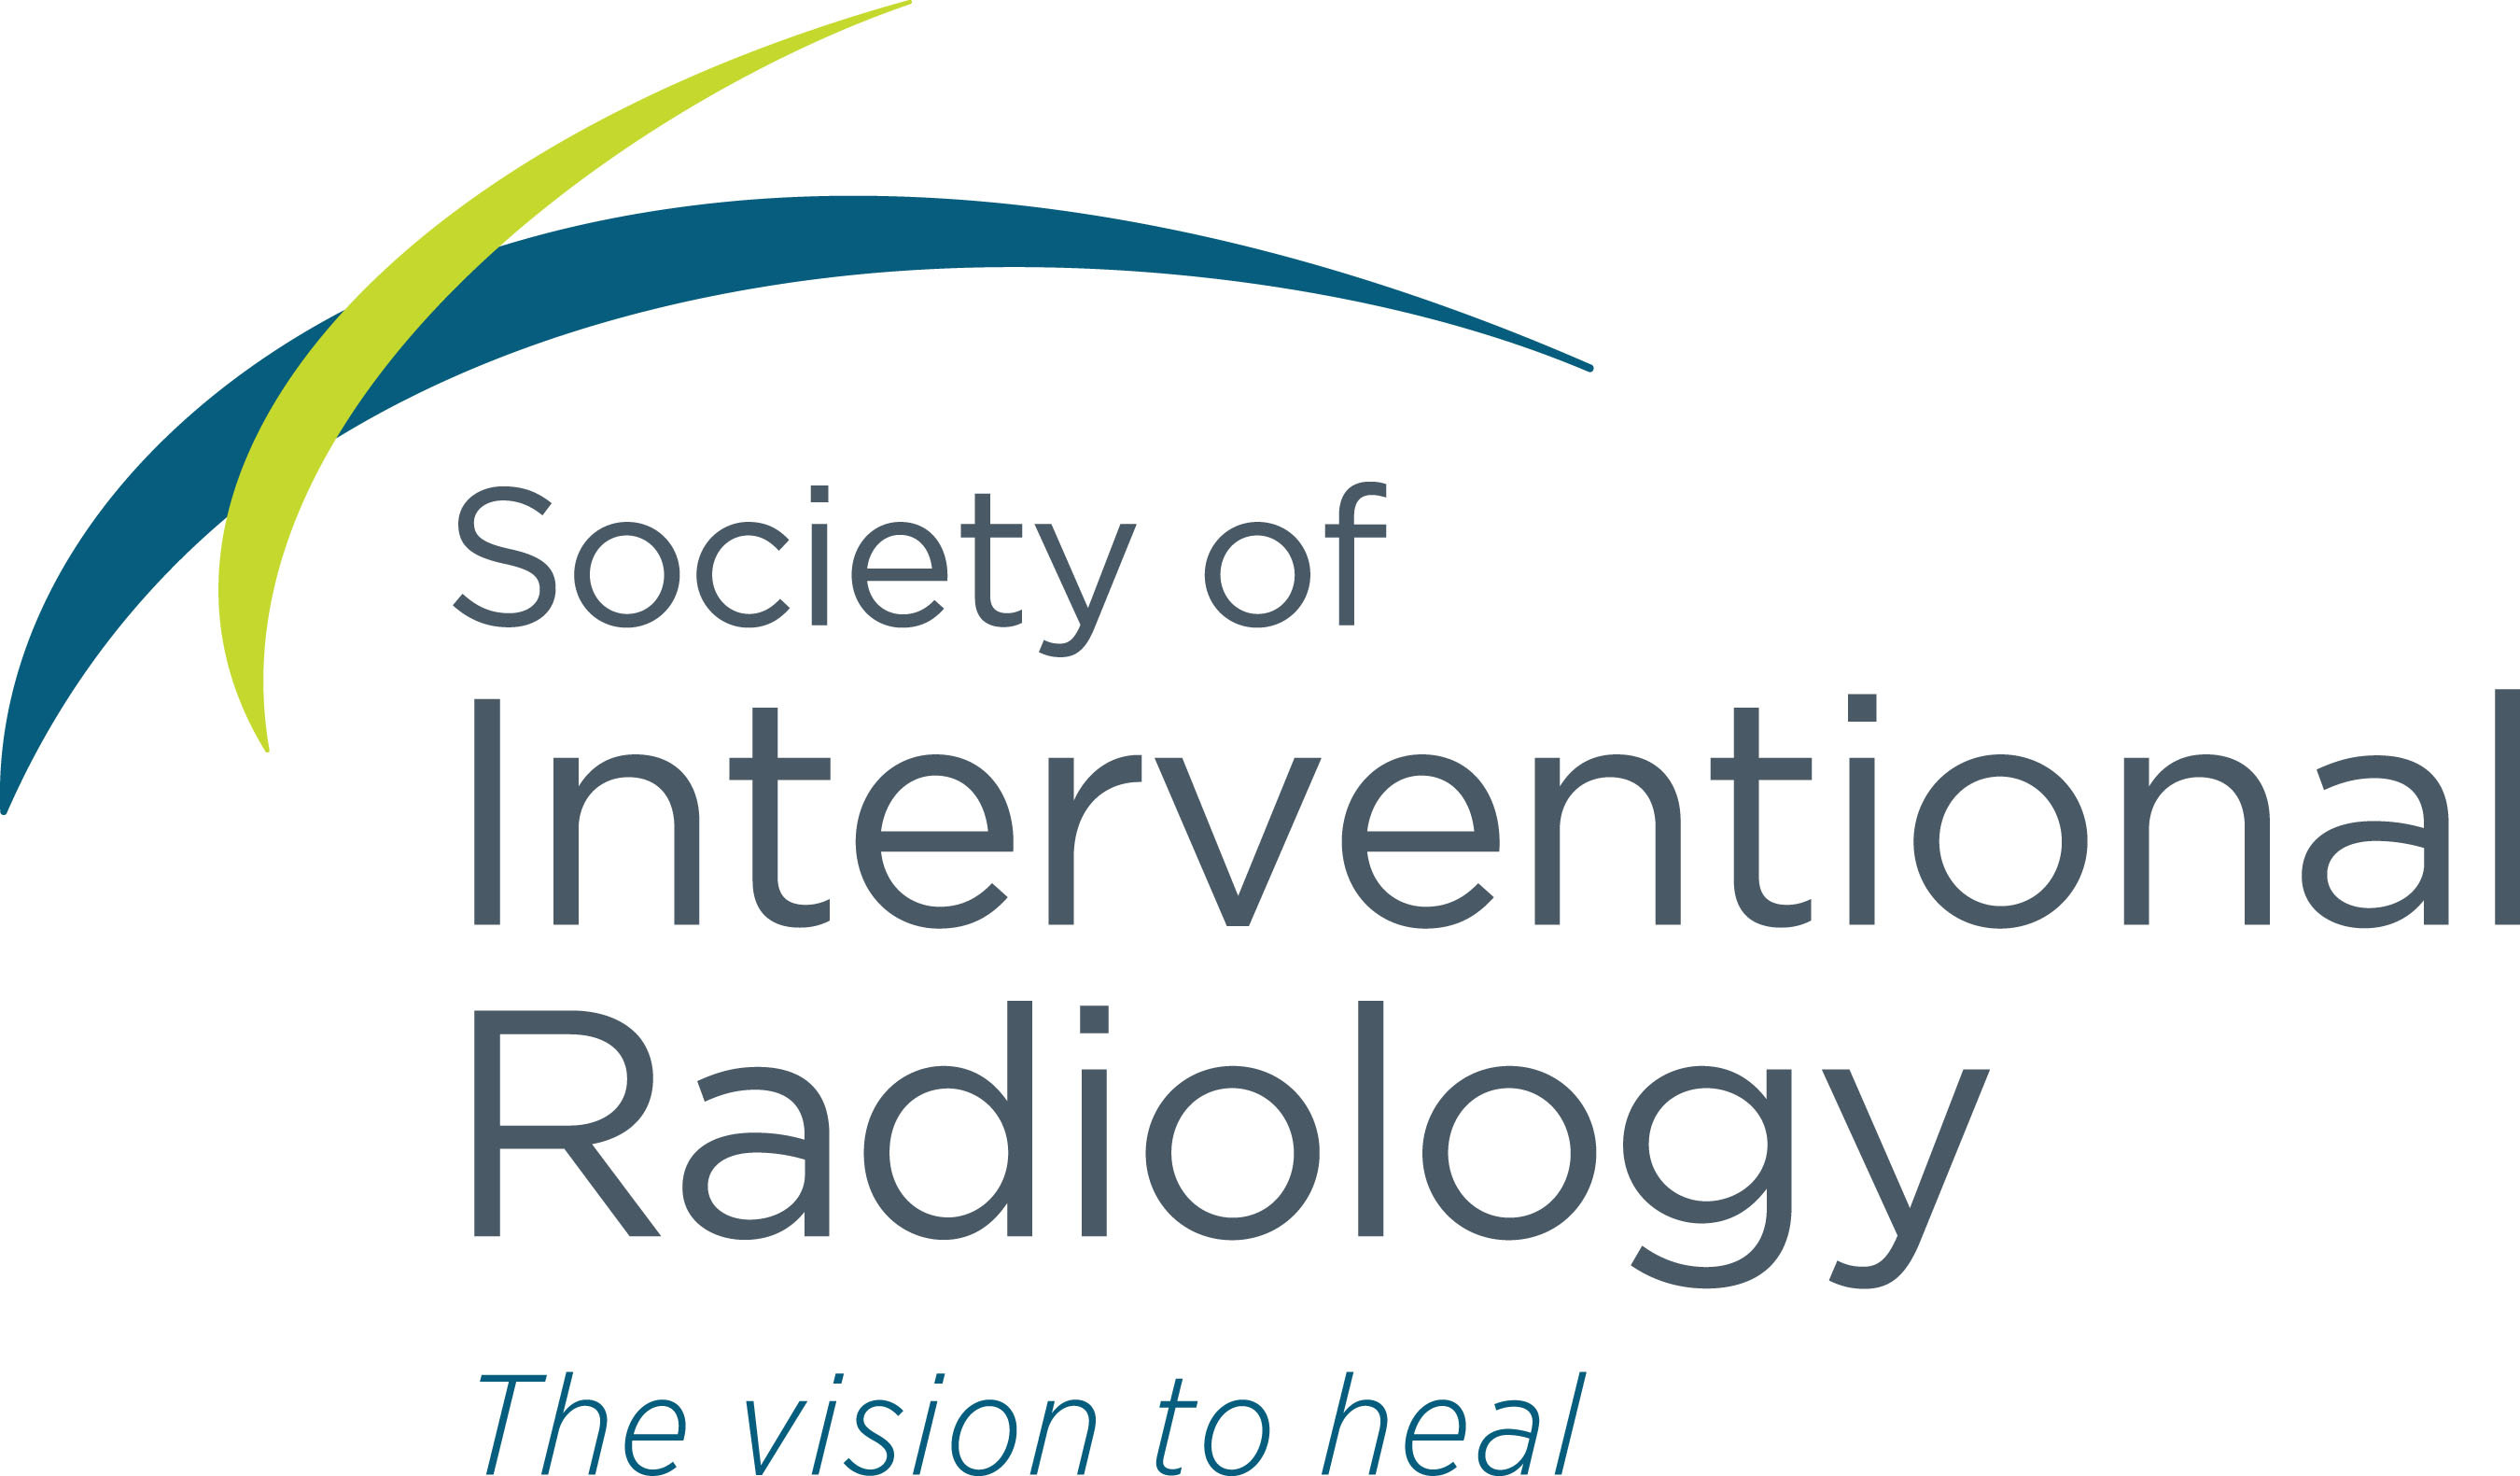 SOCIETY OF INTERVENTIONAL RADIOLOGY LOGO Excel Office Services